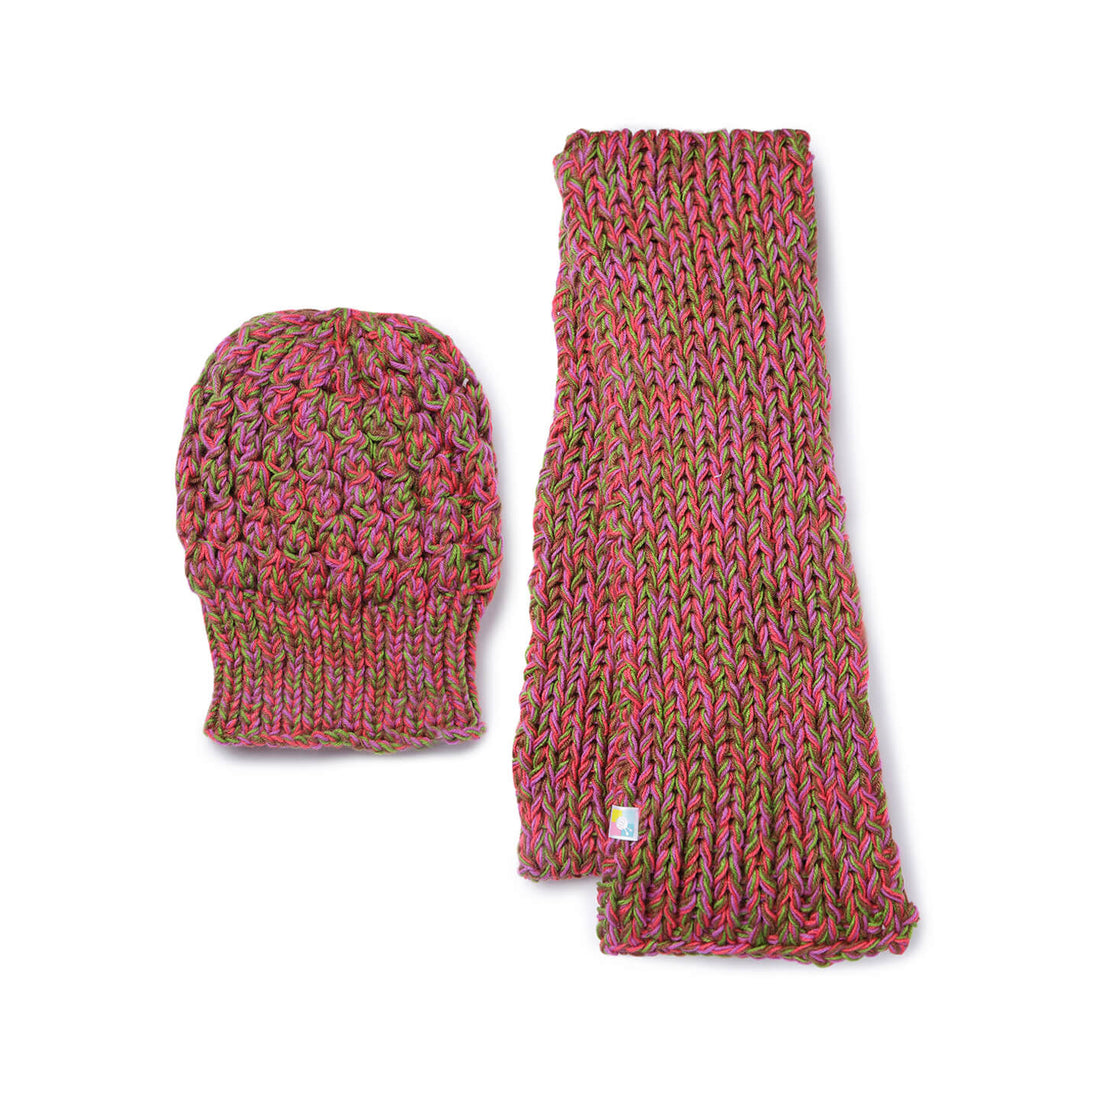 Beanie and Scarf Coordinating Set - 3178